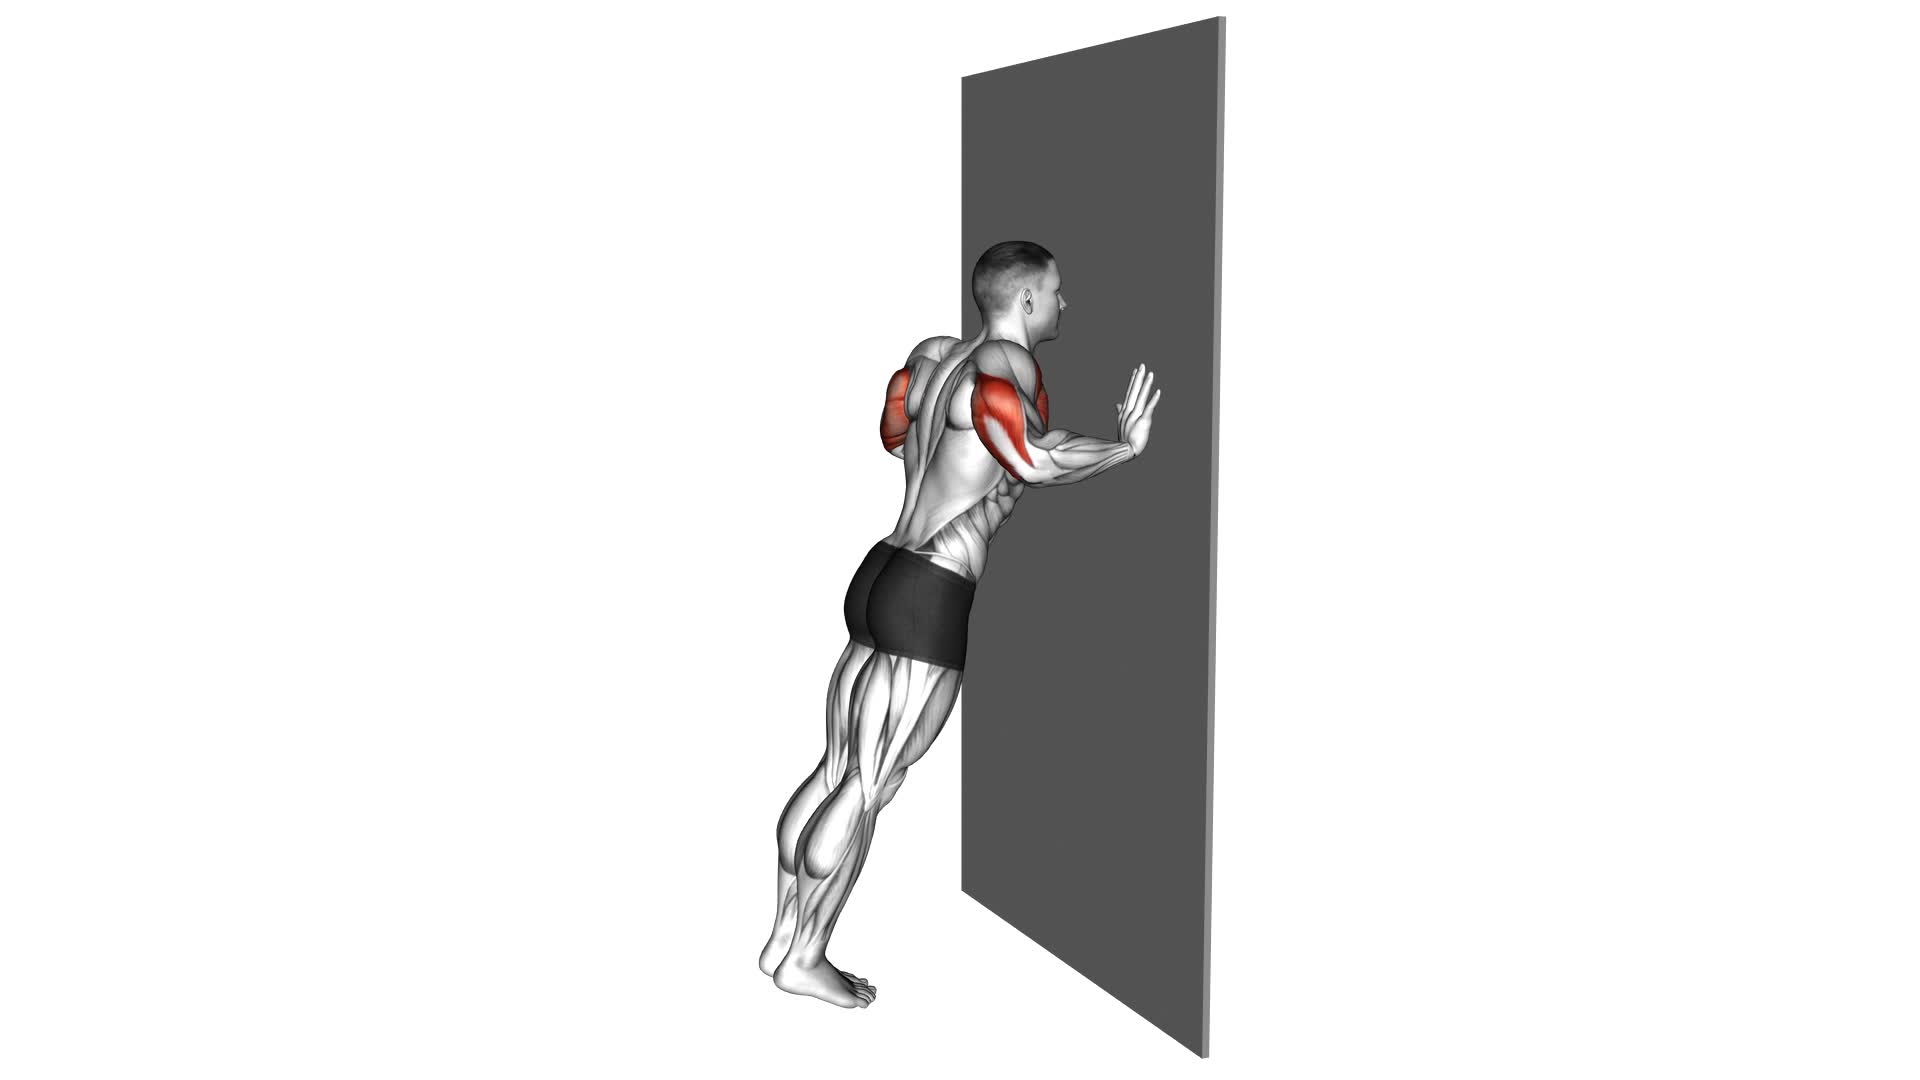 Push-up (wall) - Video Exercise Guide & Tips